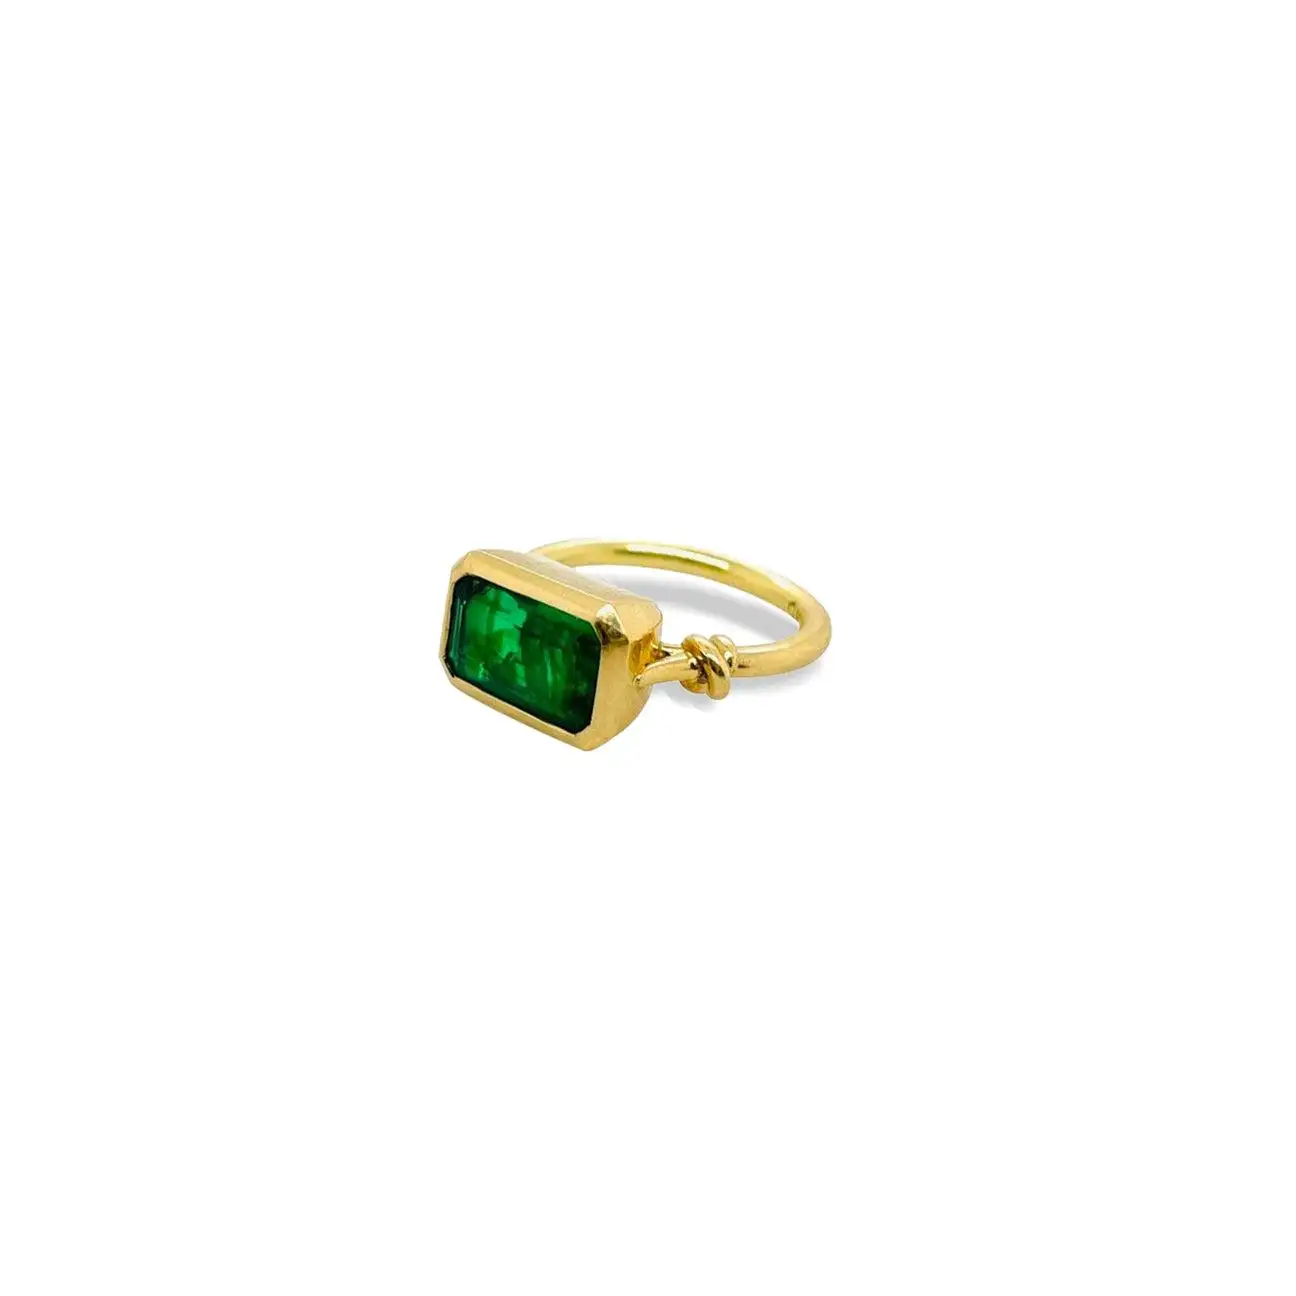 3ct-Knot-Emerald-Ring-in-18ct-Yellow-Gold-2.webp